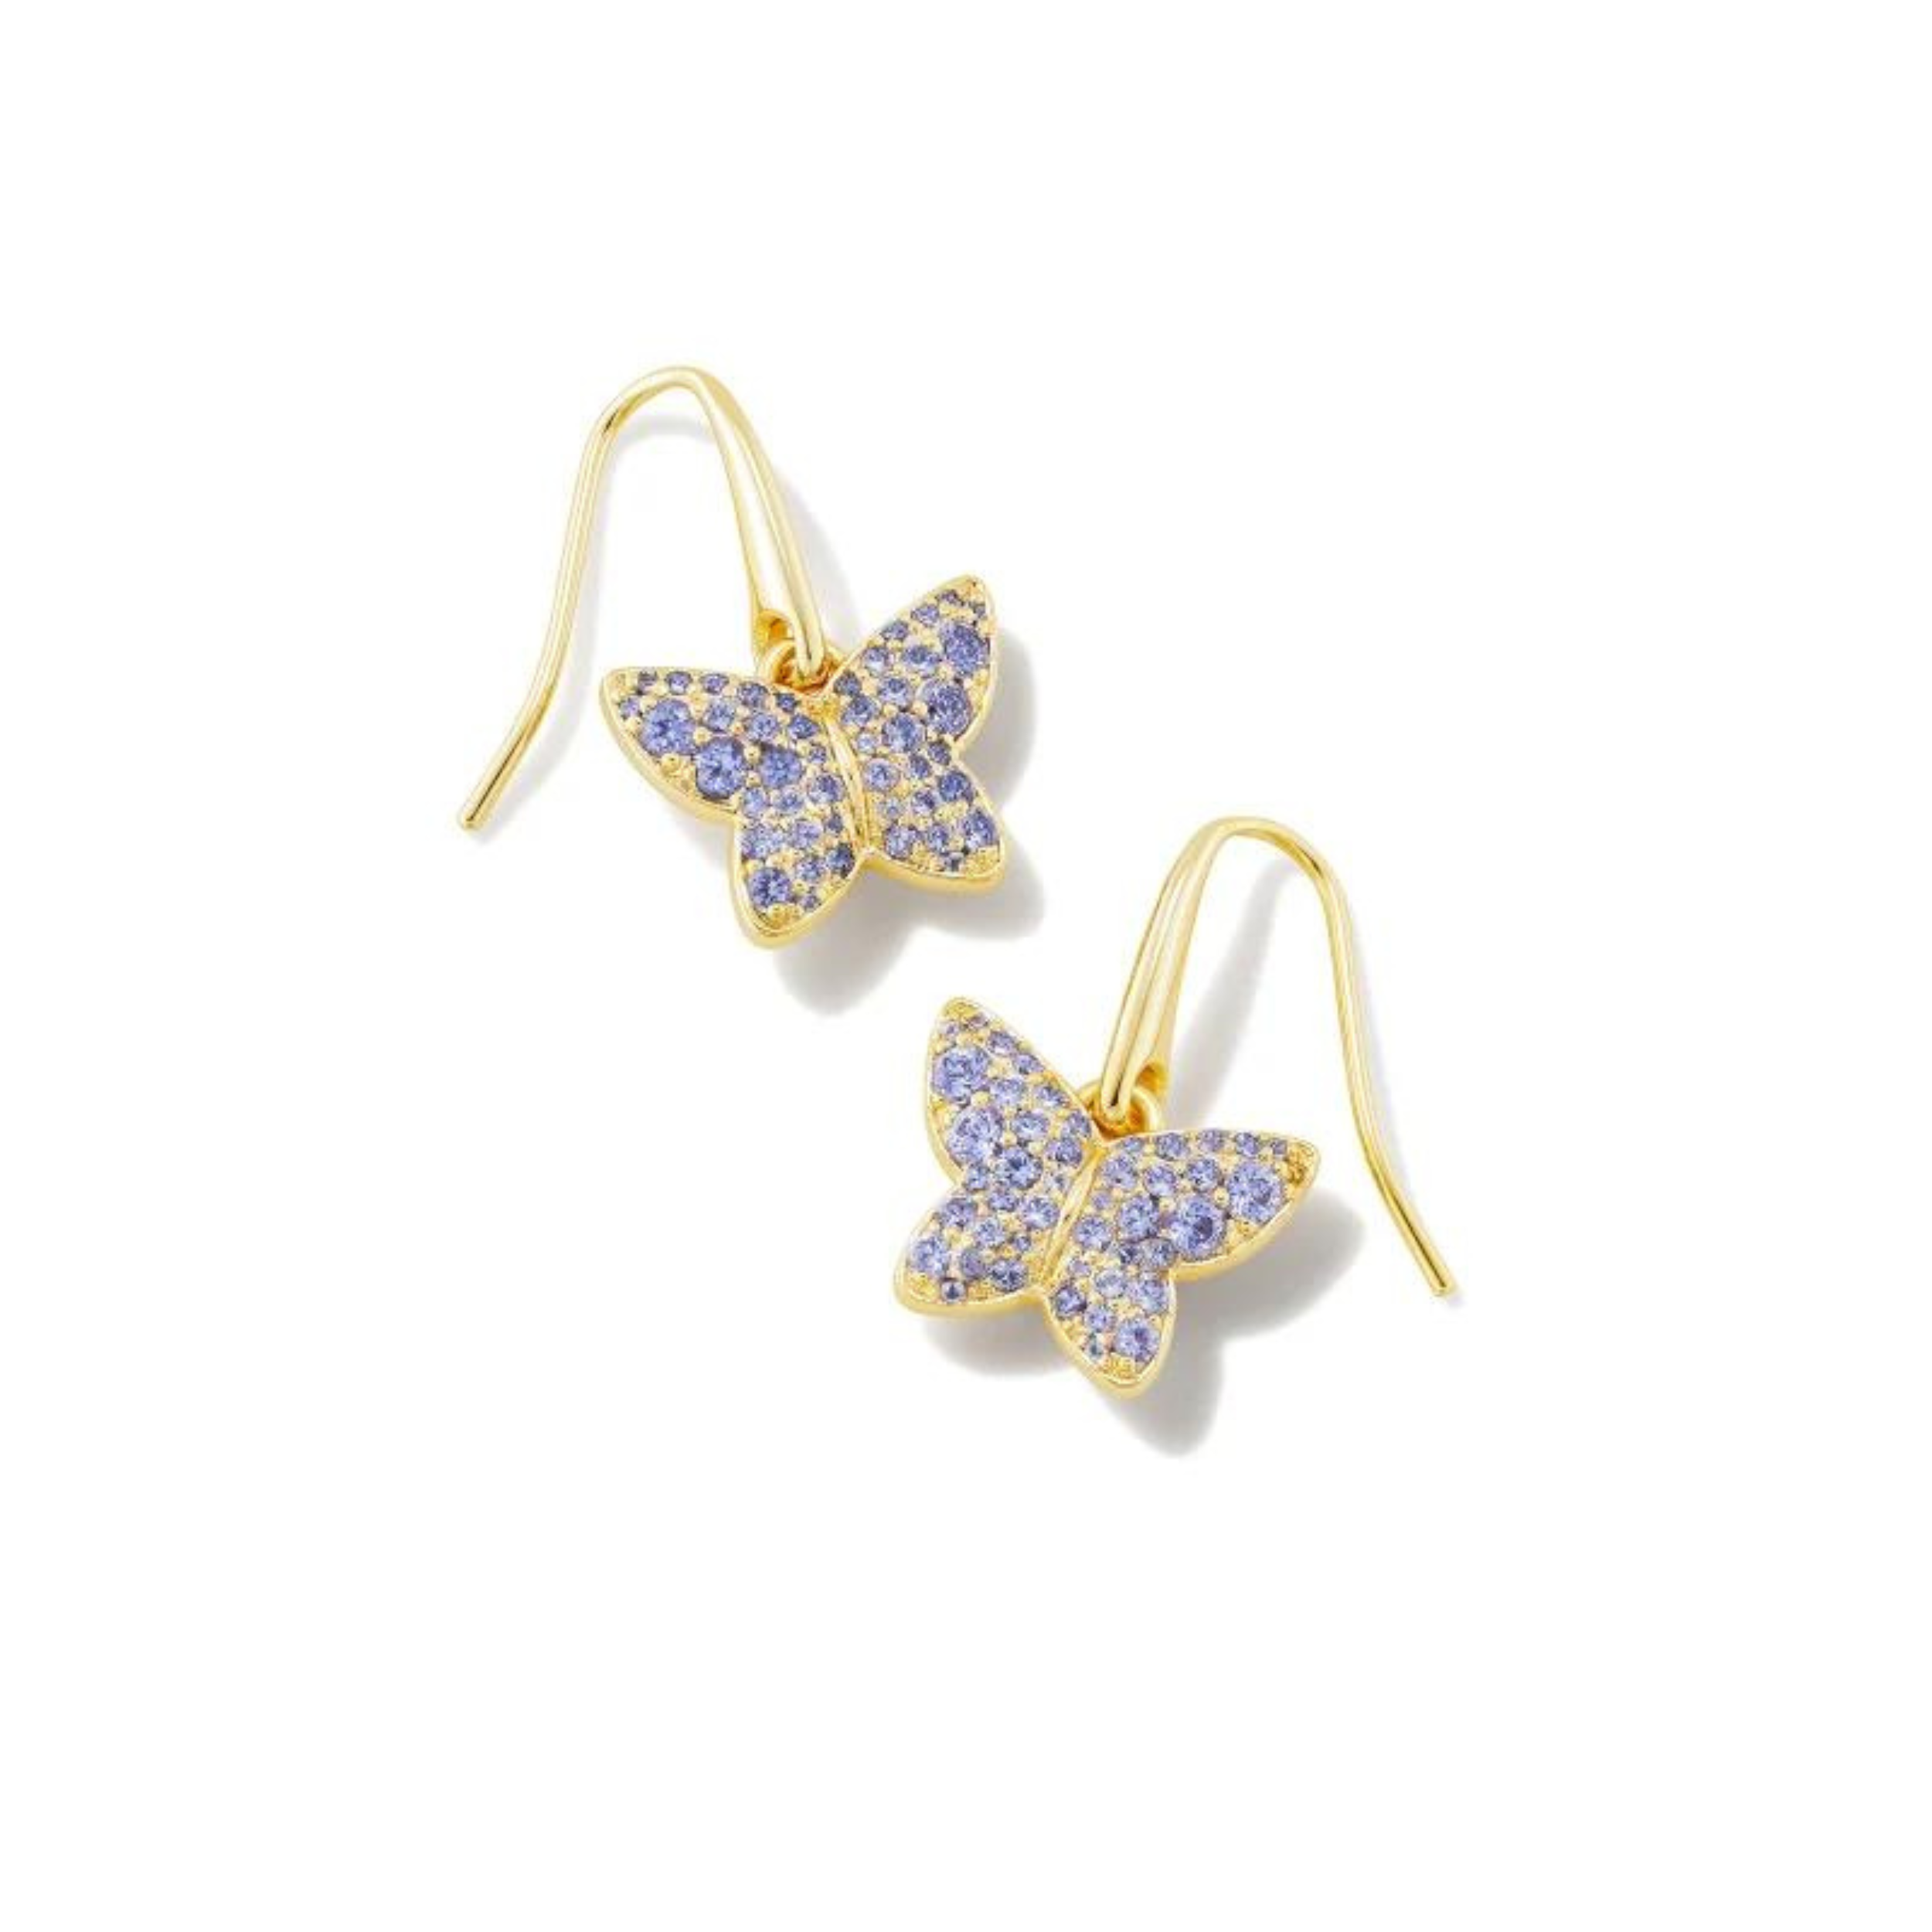 Gold butterfly dangle earrings with violet crystals, pictured on a white background.